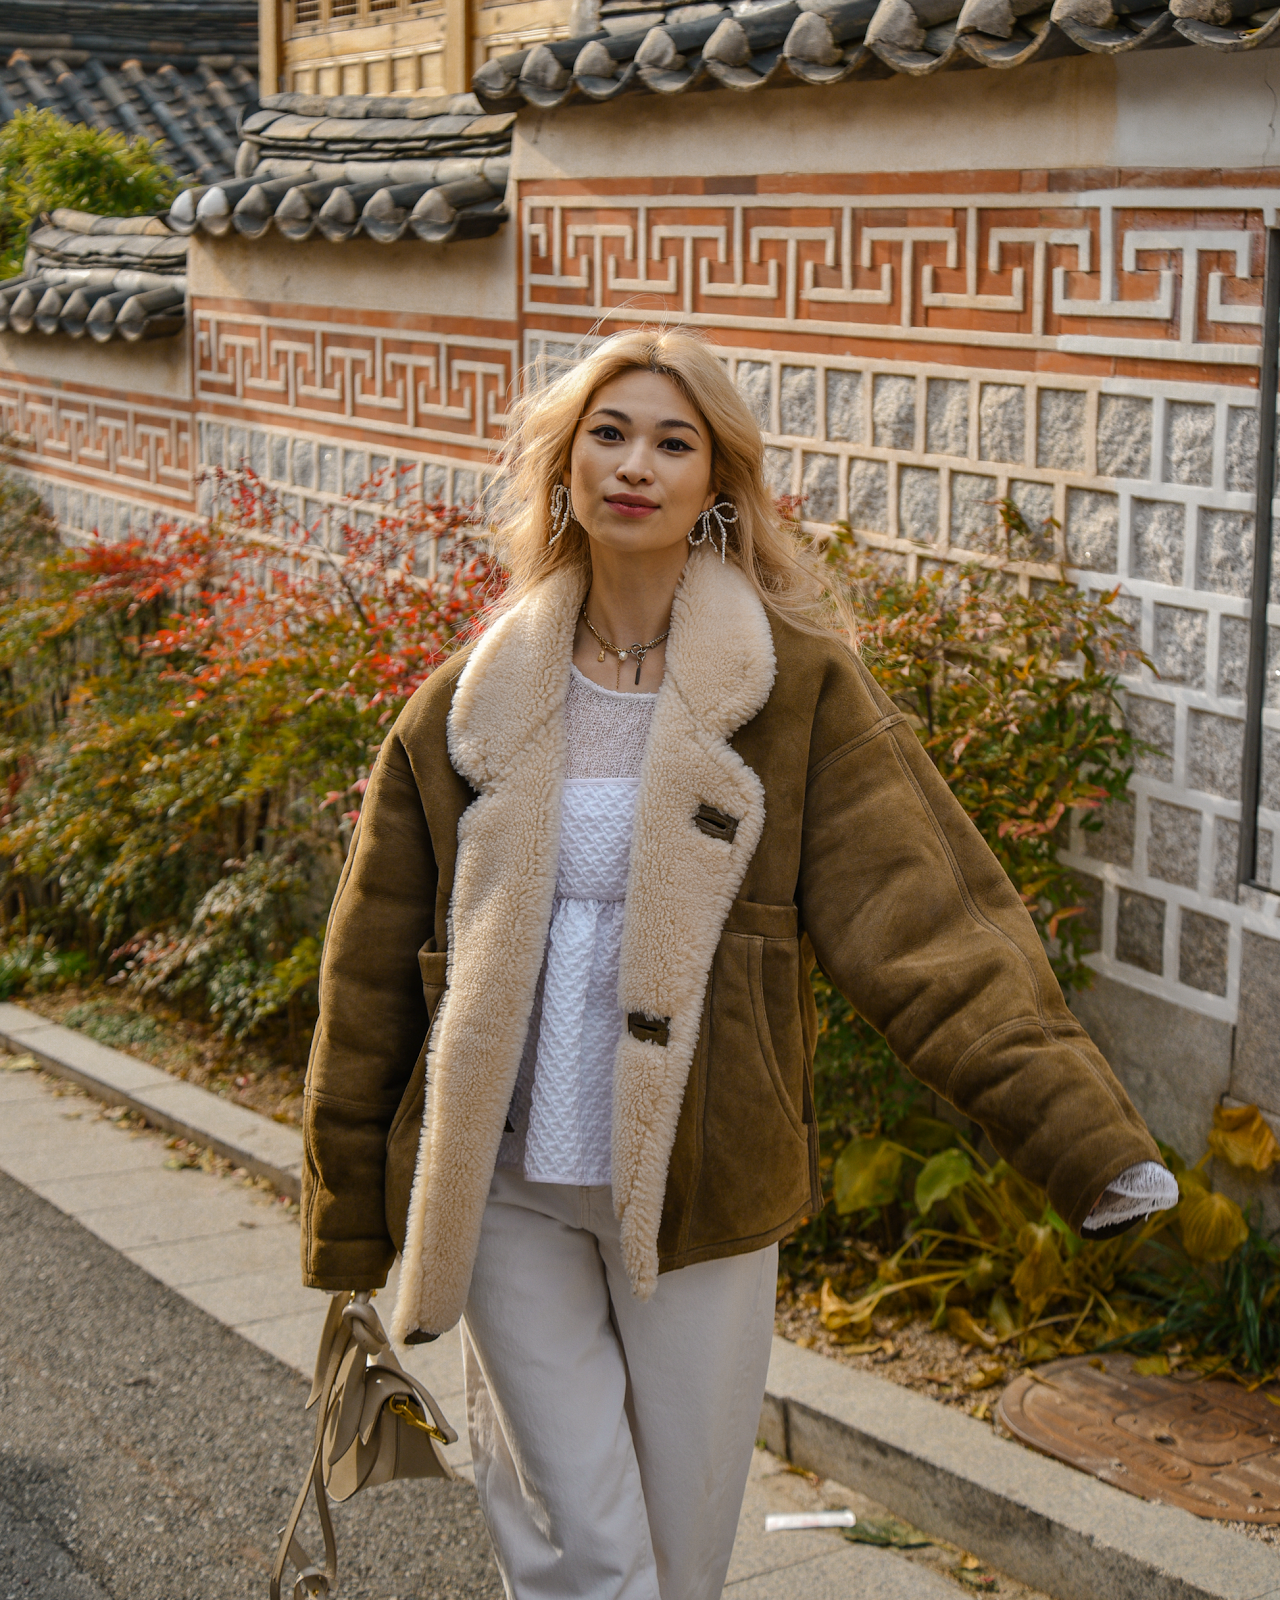 Shearling winter coat, neutral shearling coat outfits, beige monochrome winter outfits - FOREVERVANNY.com